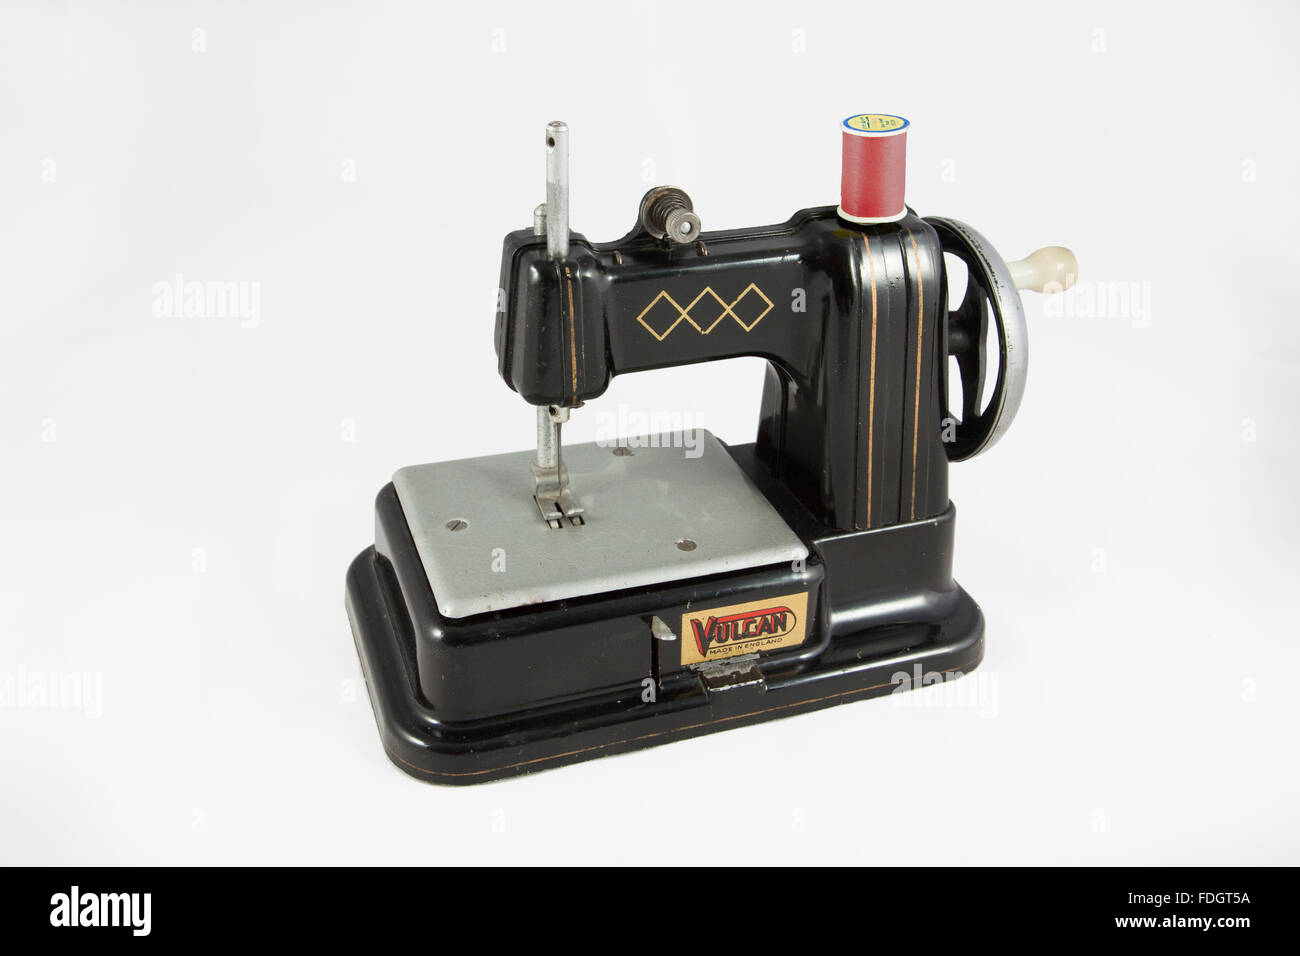 Vintage Toy Sewing Machine 1950s Vulcan Stock Photo